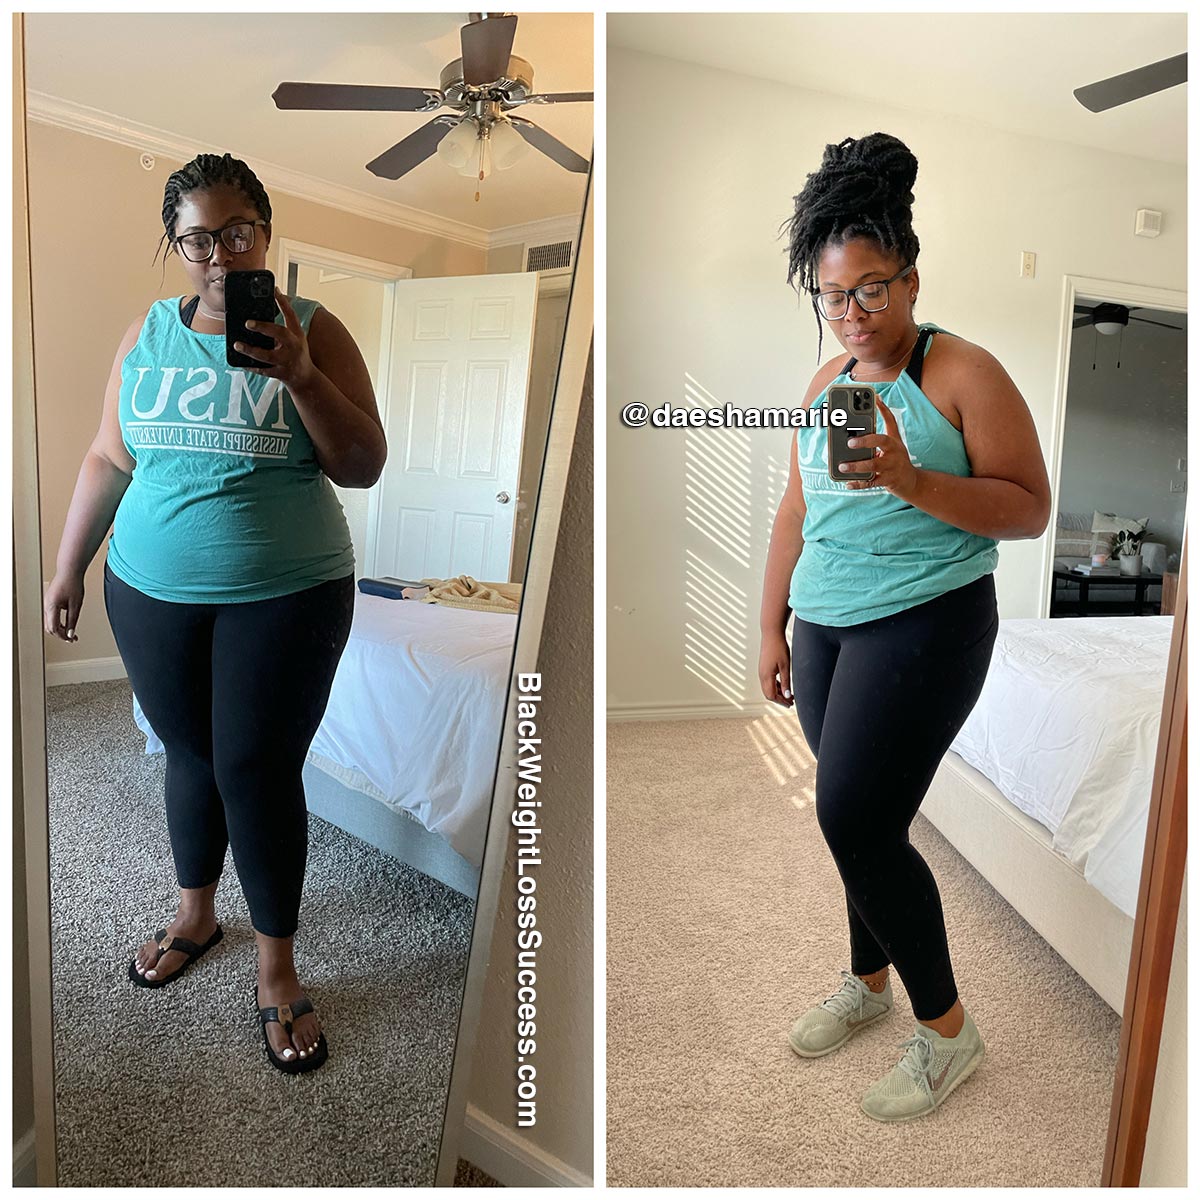 Daesha before and after weight loss